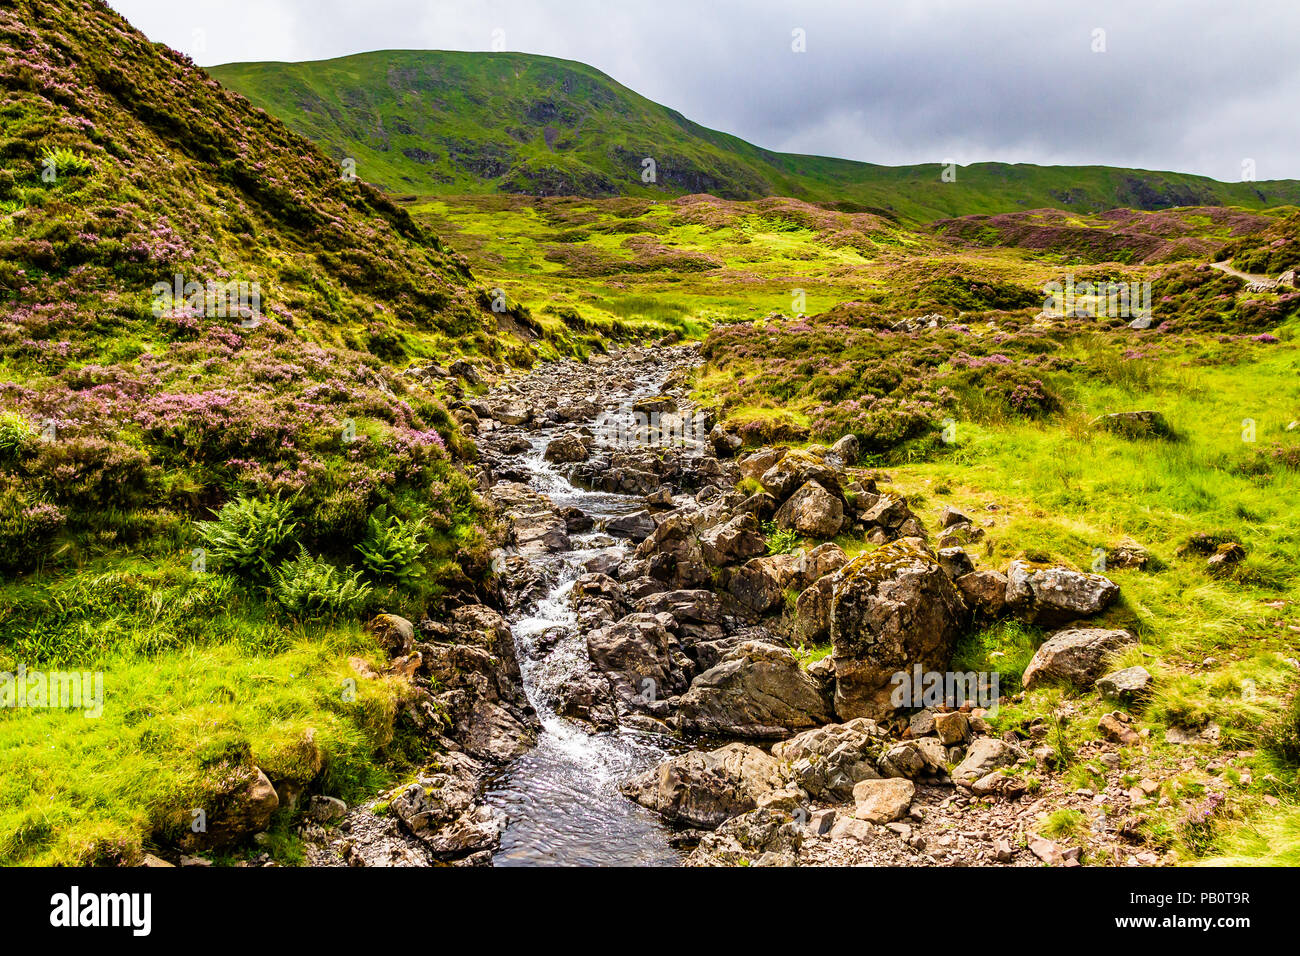 Grey Mare's Tail Nature Reserve, Moffat Hills, Dumfries & Galloway, Scotland. July 2018. Stock Photo